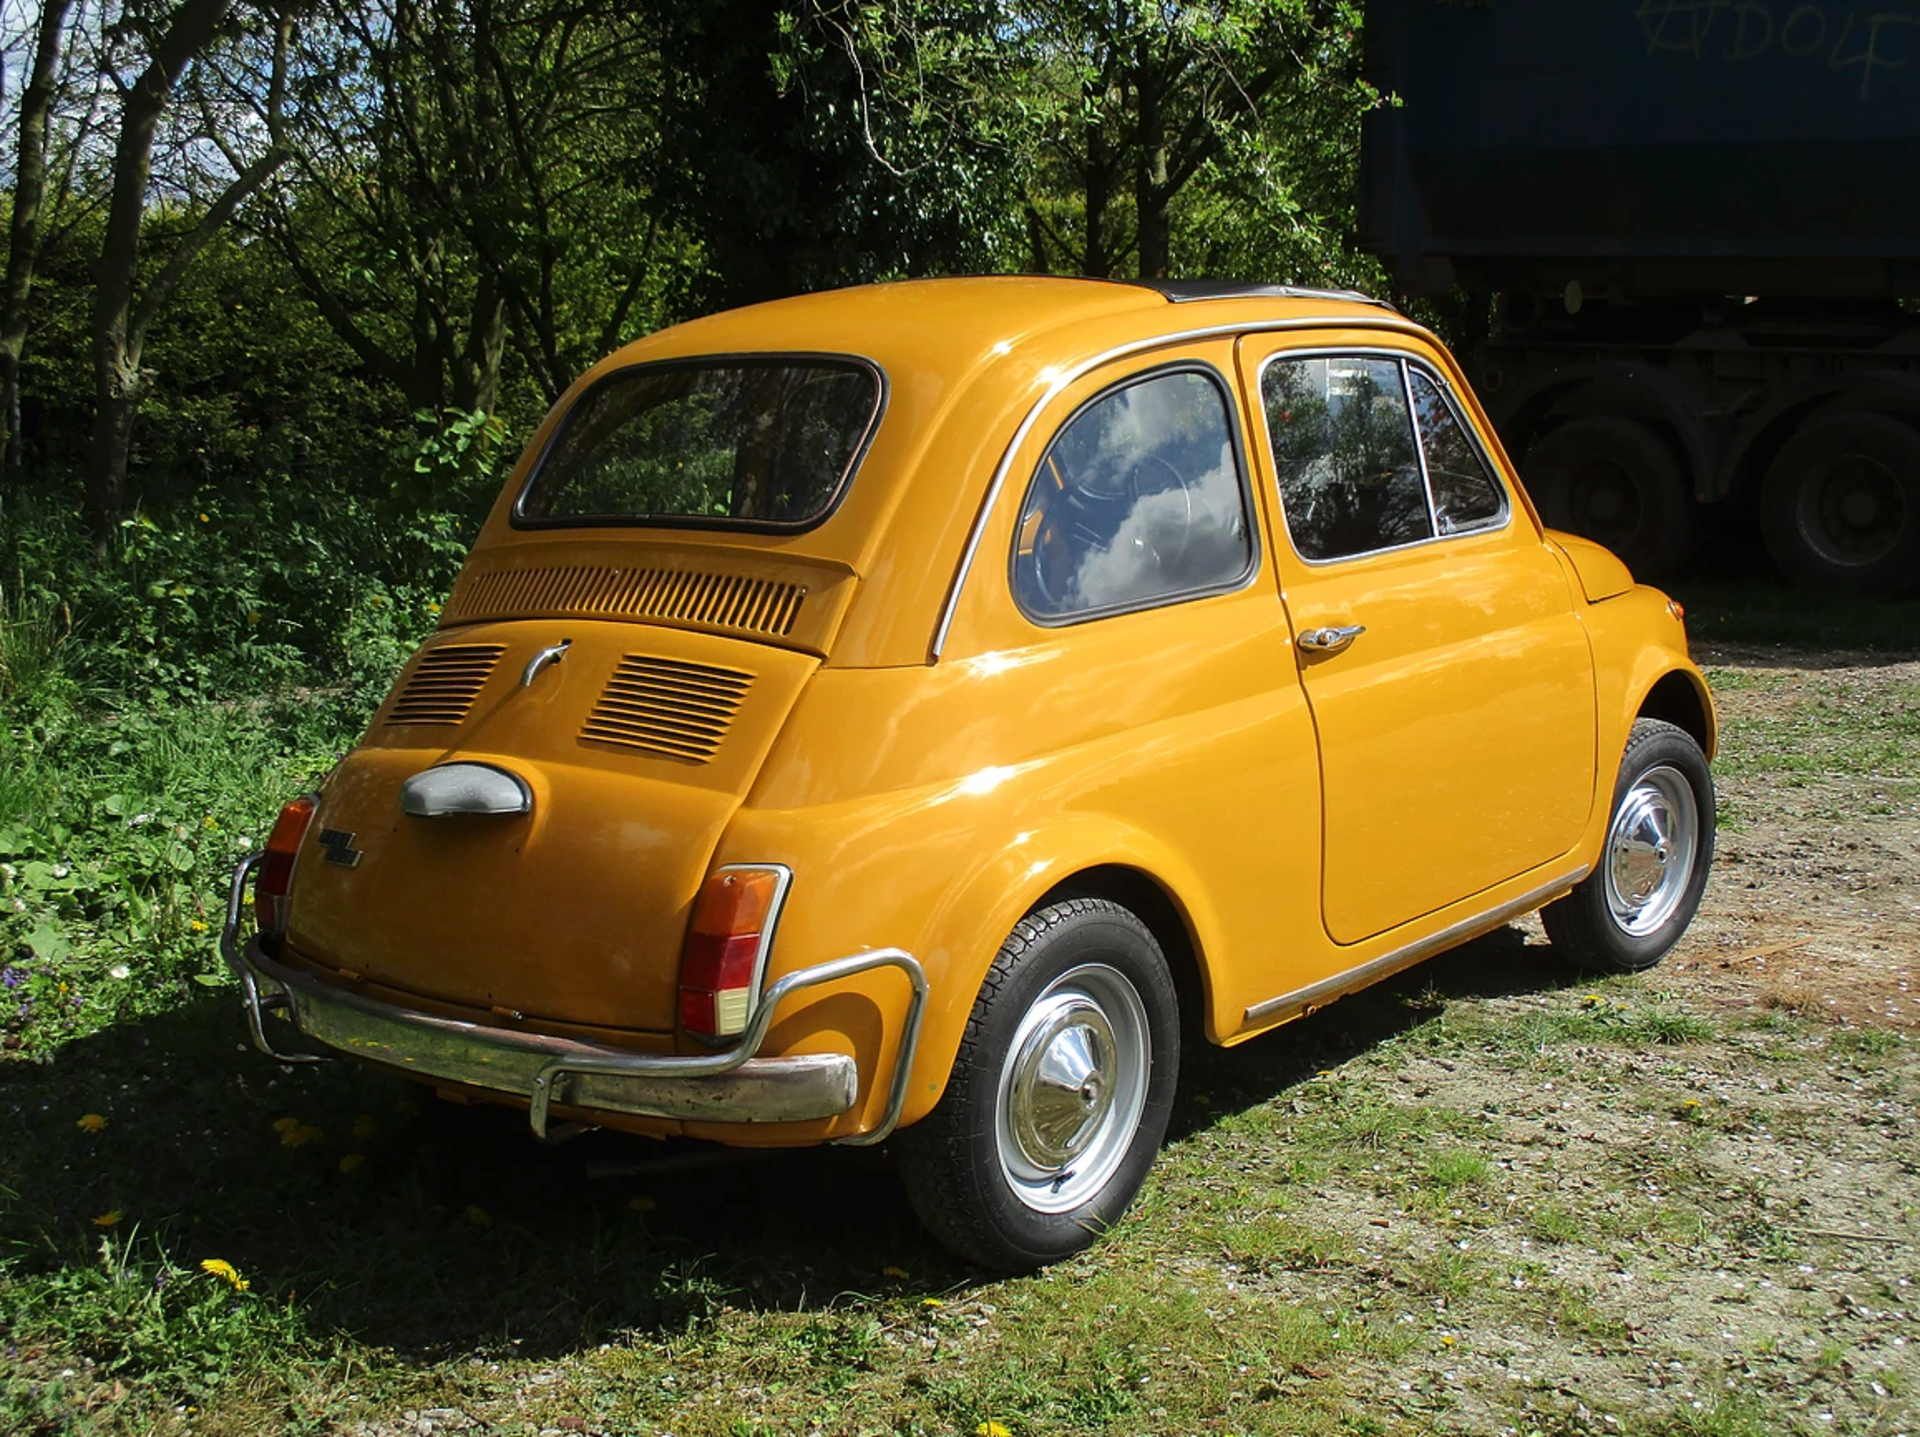 1972 Fiat 500 Lusso - Image 4 of 16